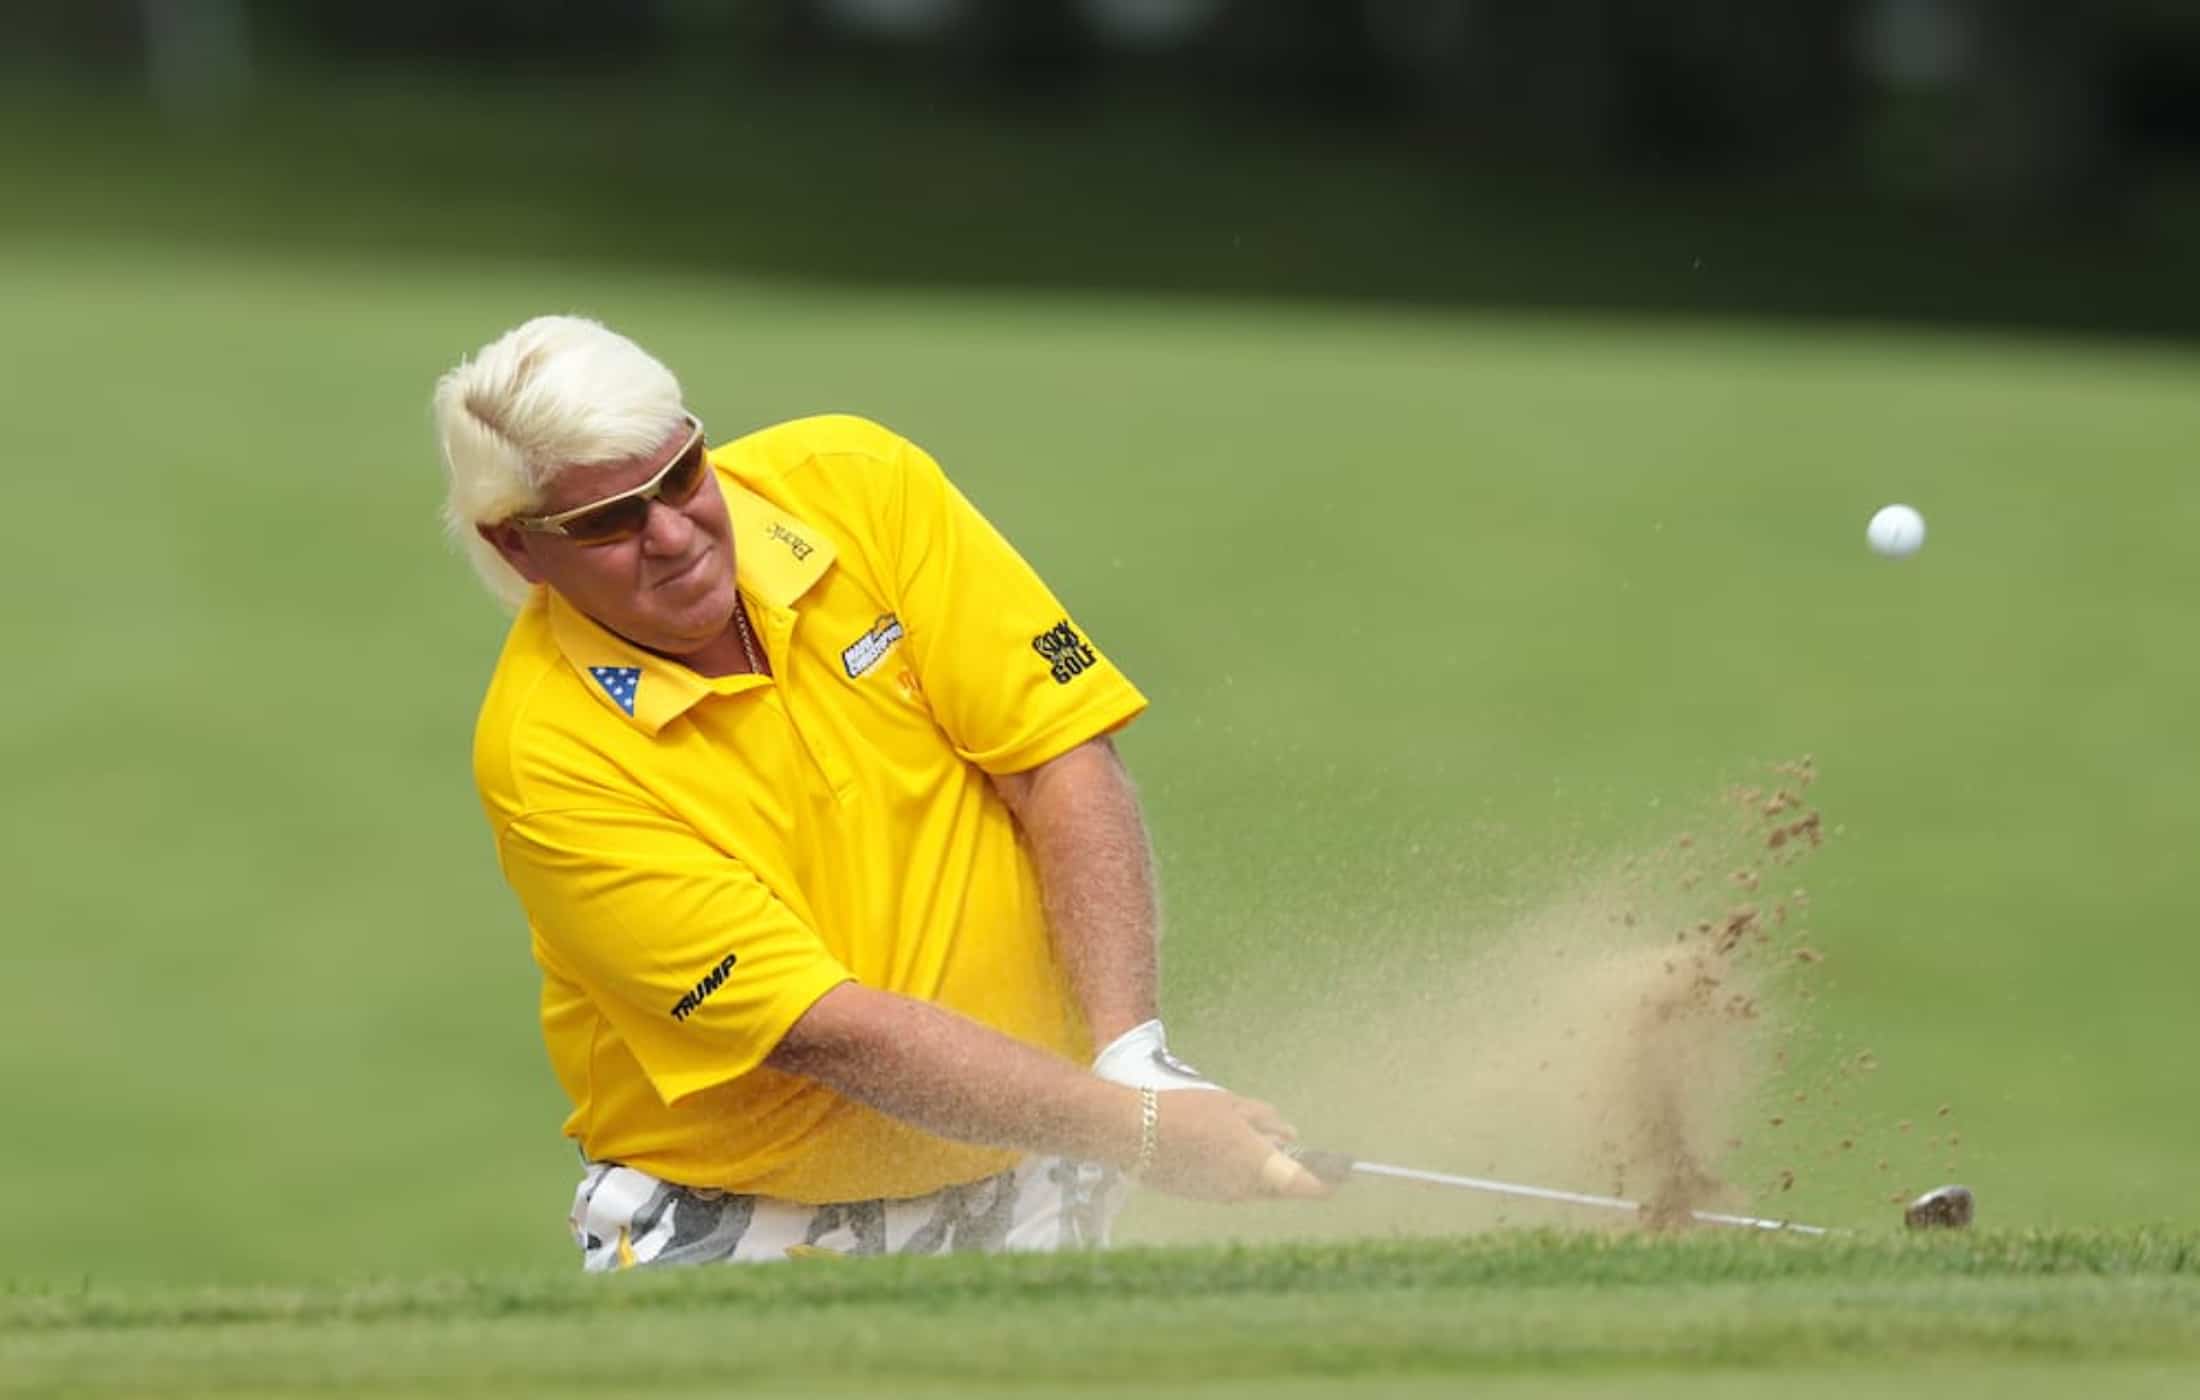 John Daly net worth, age, wiki, family, biography and latest updates